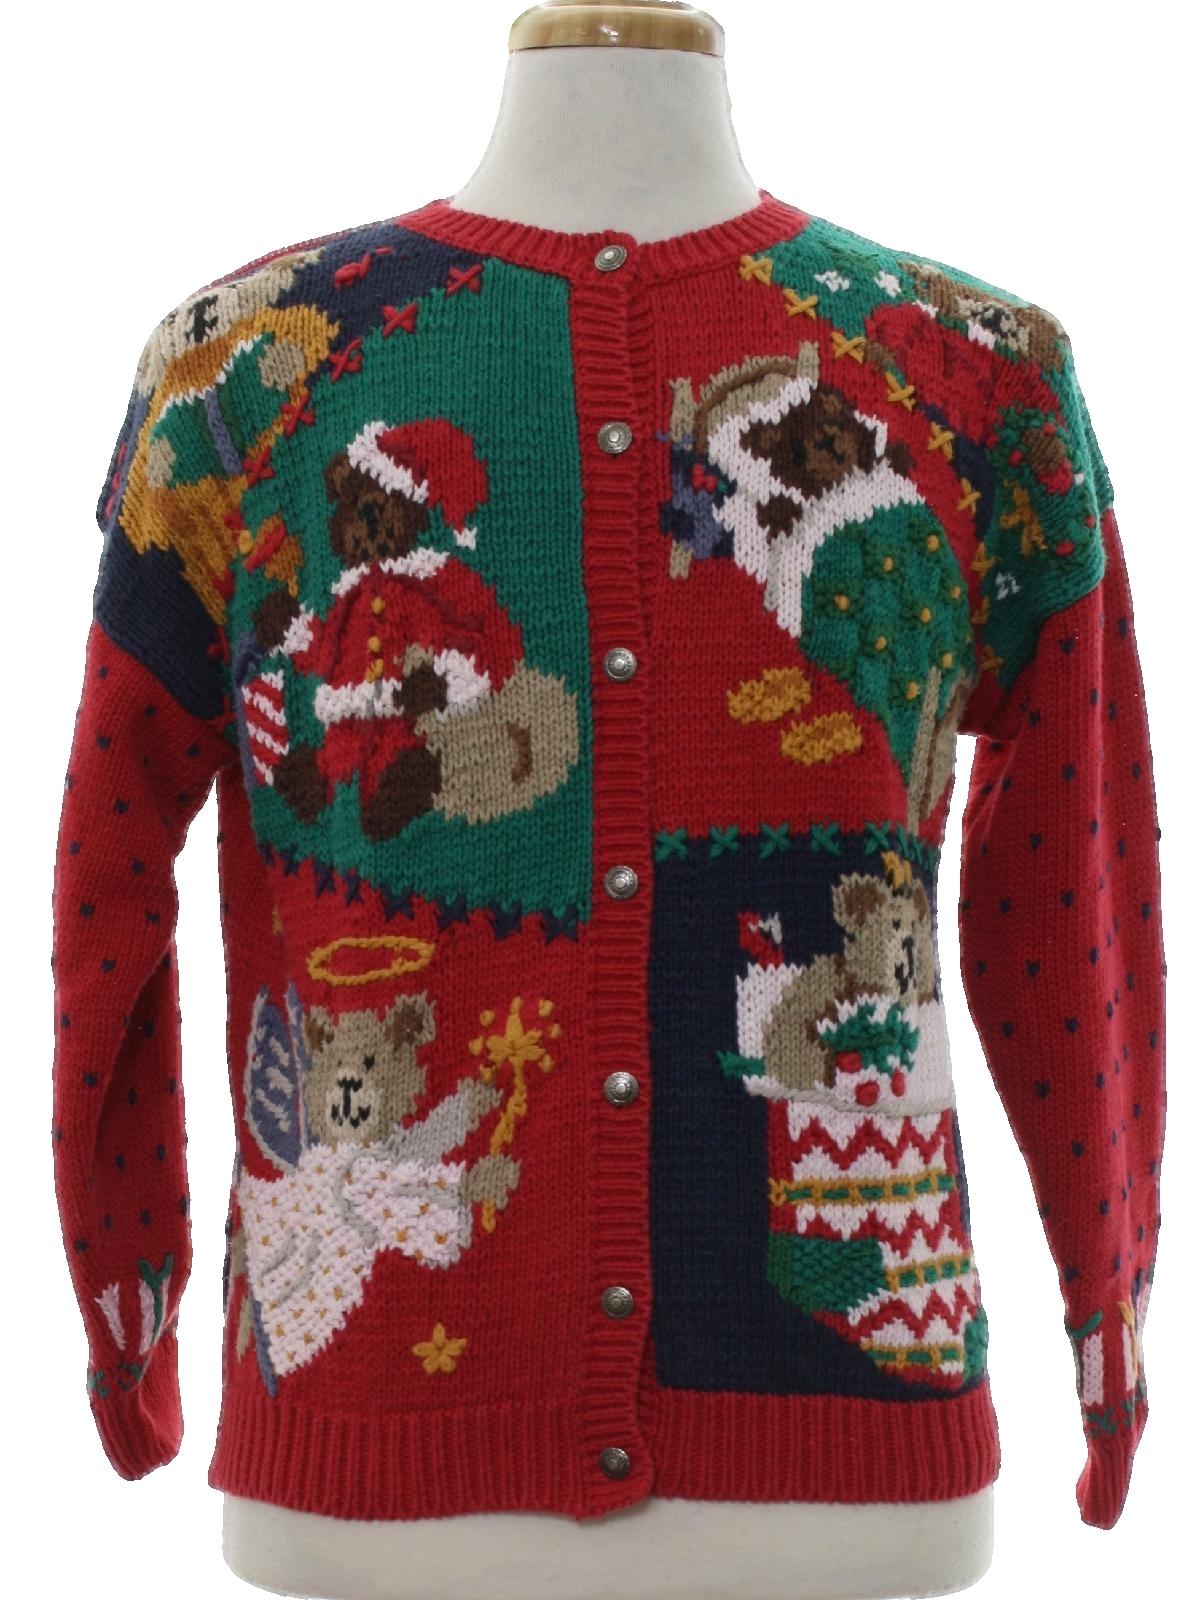 Bear-riffic Ugly Christmas Sweater: retro look -Signatures by Northern ...